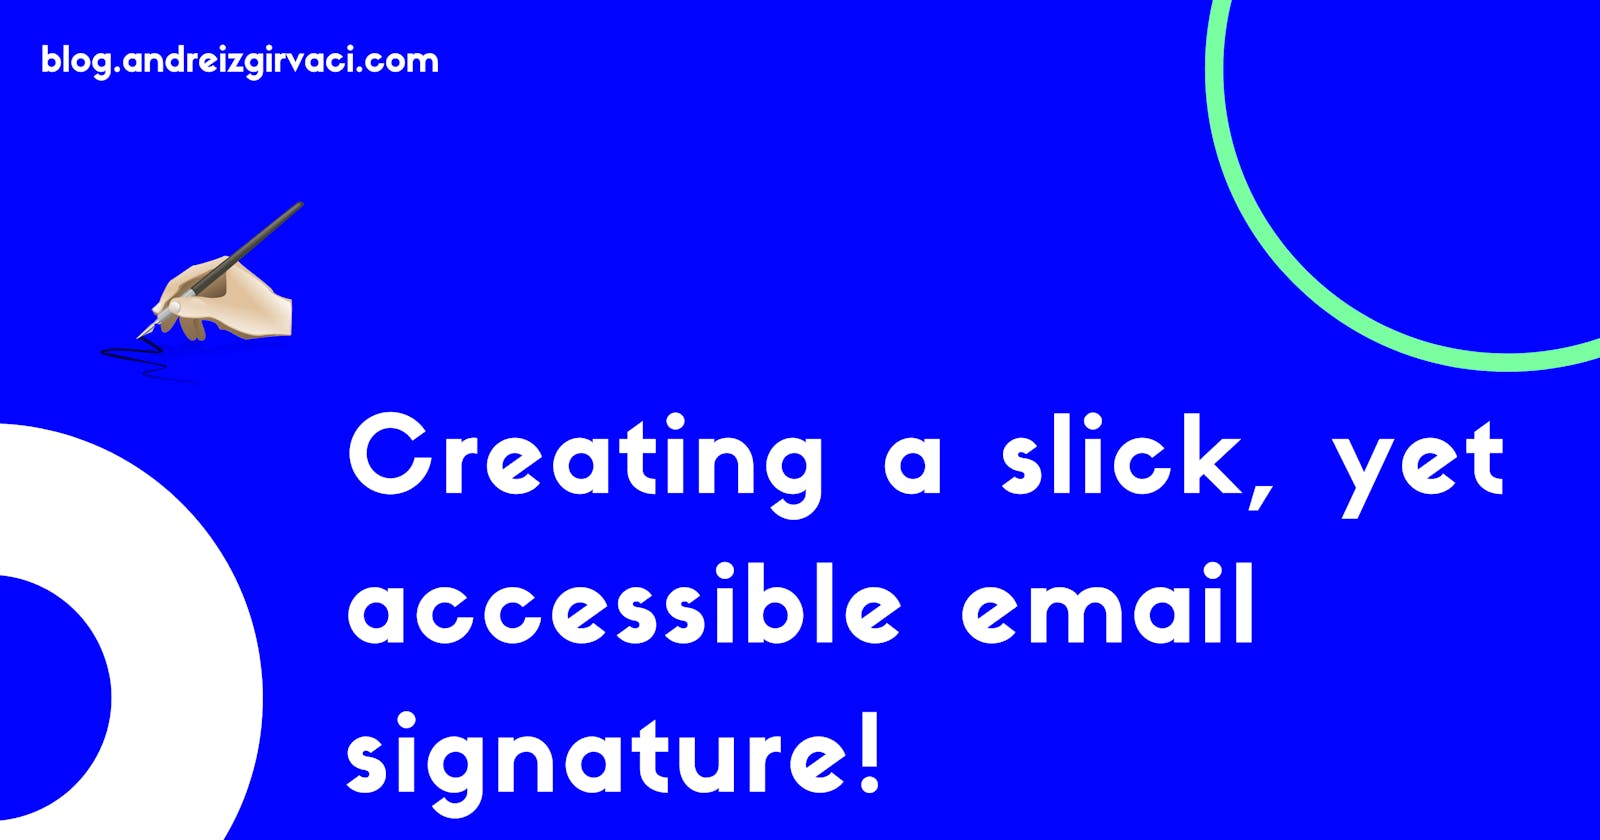 Creating a slick, yet accessible email signature! 🖋